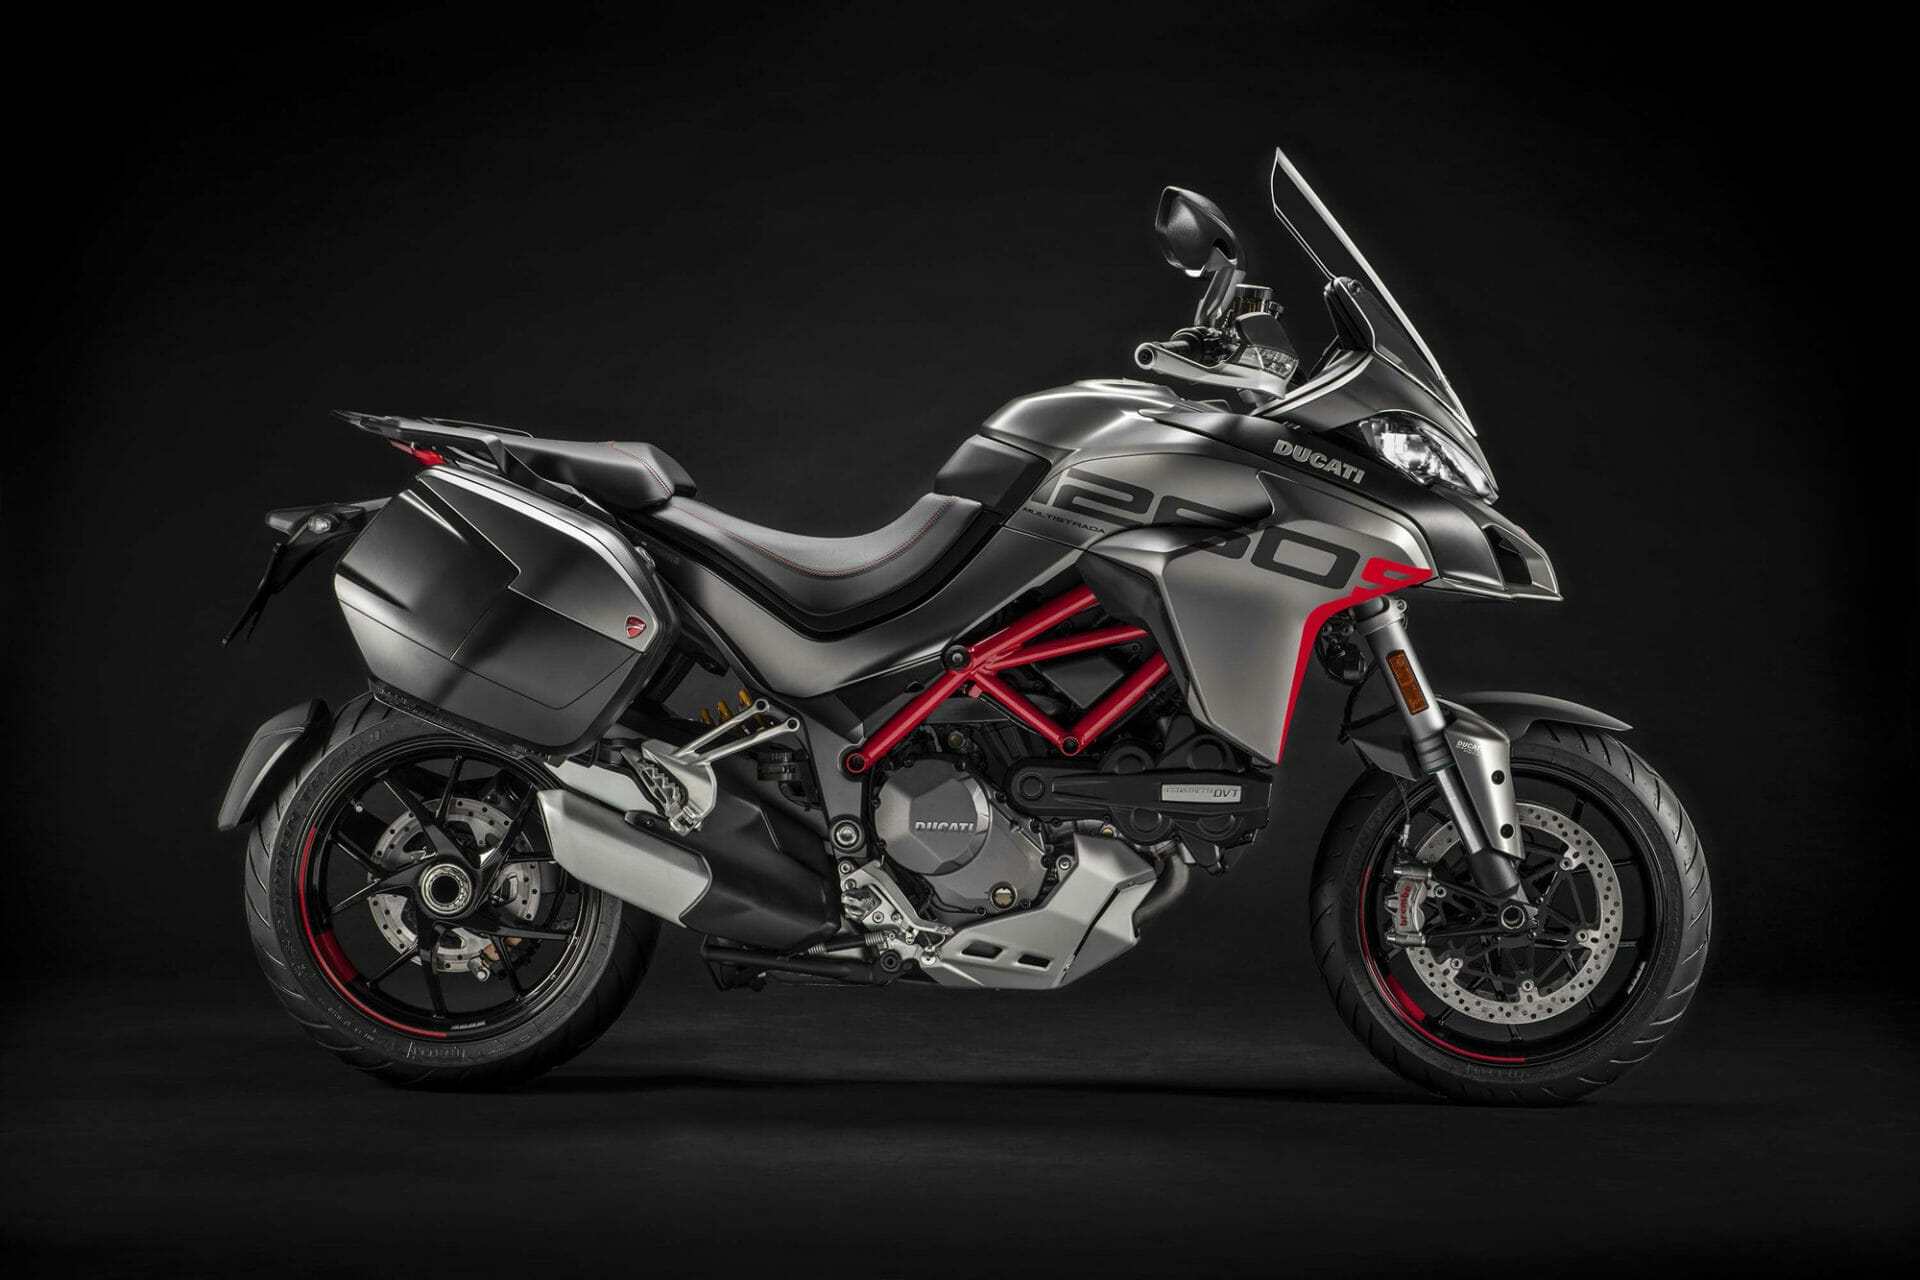 #Ducati #Multistrada 1260 Grand Tour presented at press conference. The Multistrada for the big journey - also in the App "Motorcycle News"